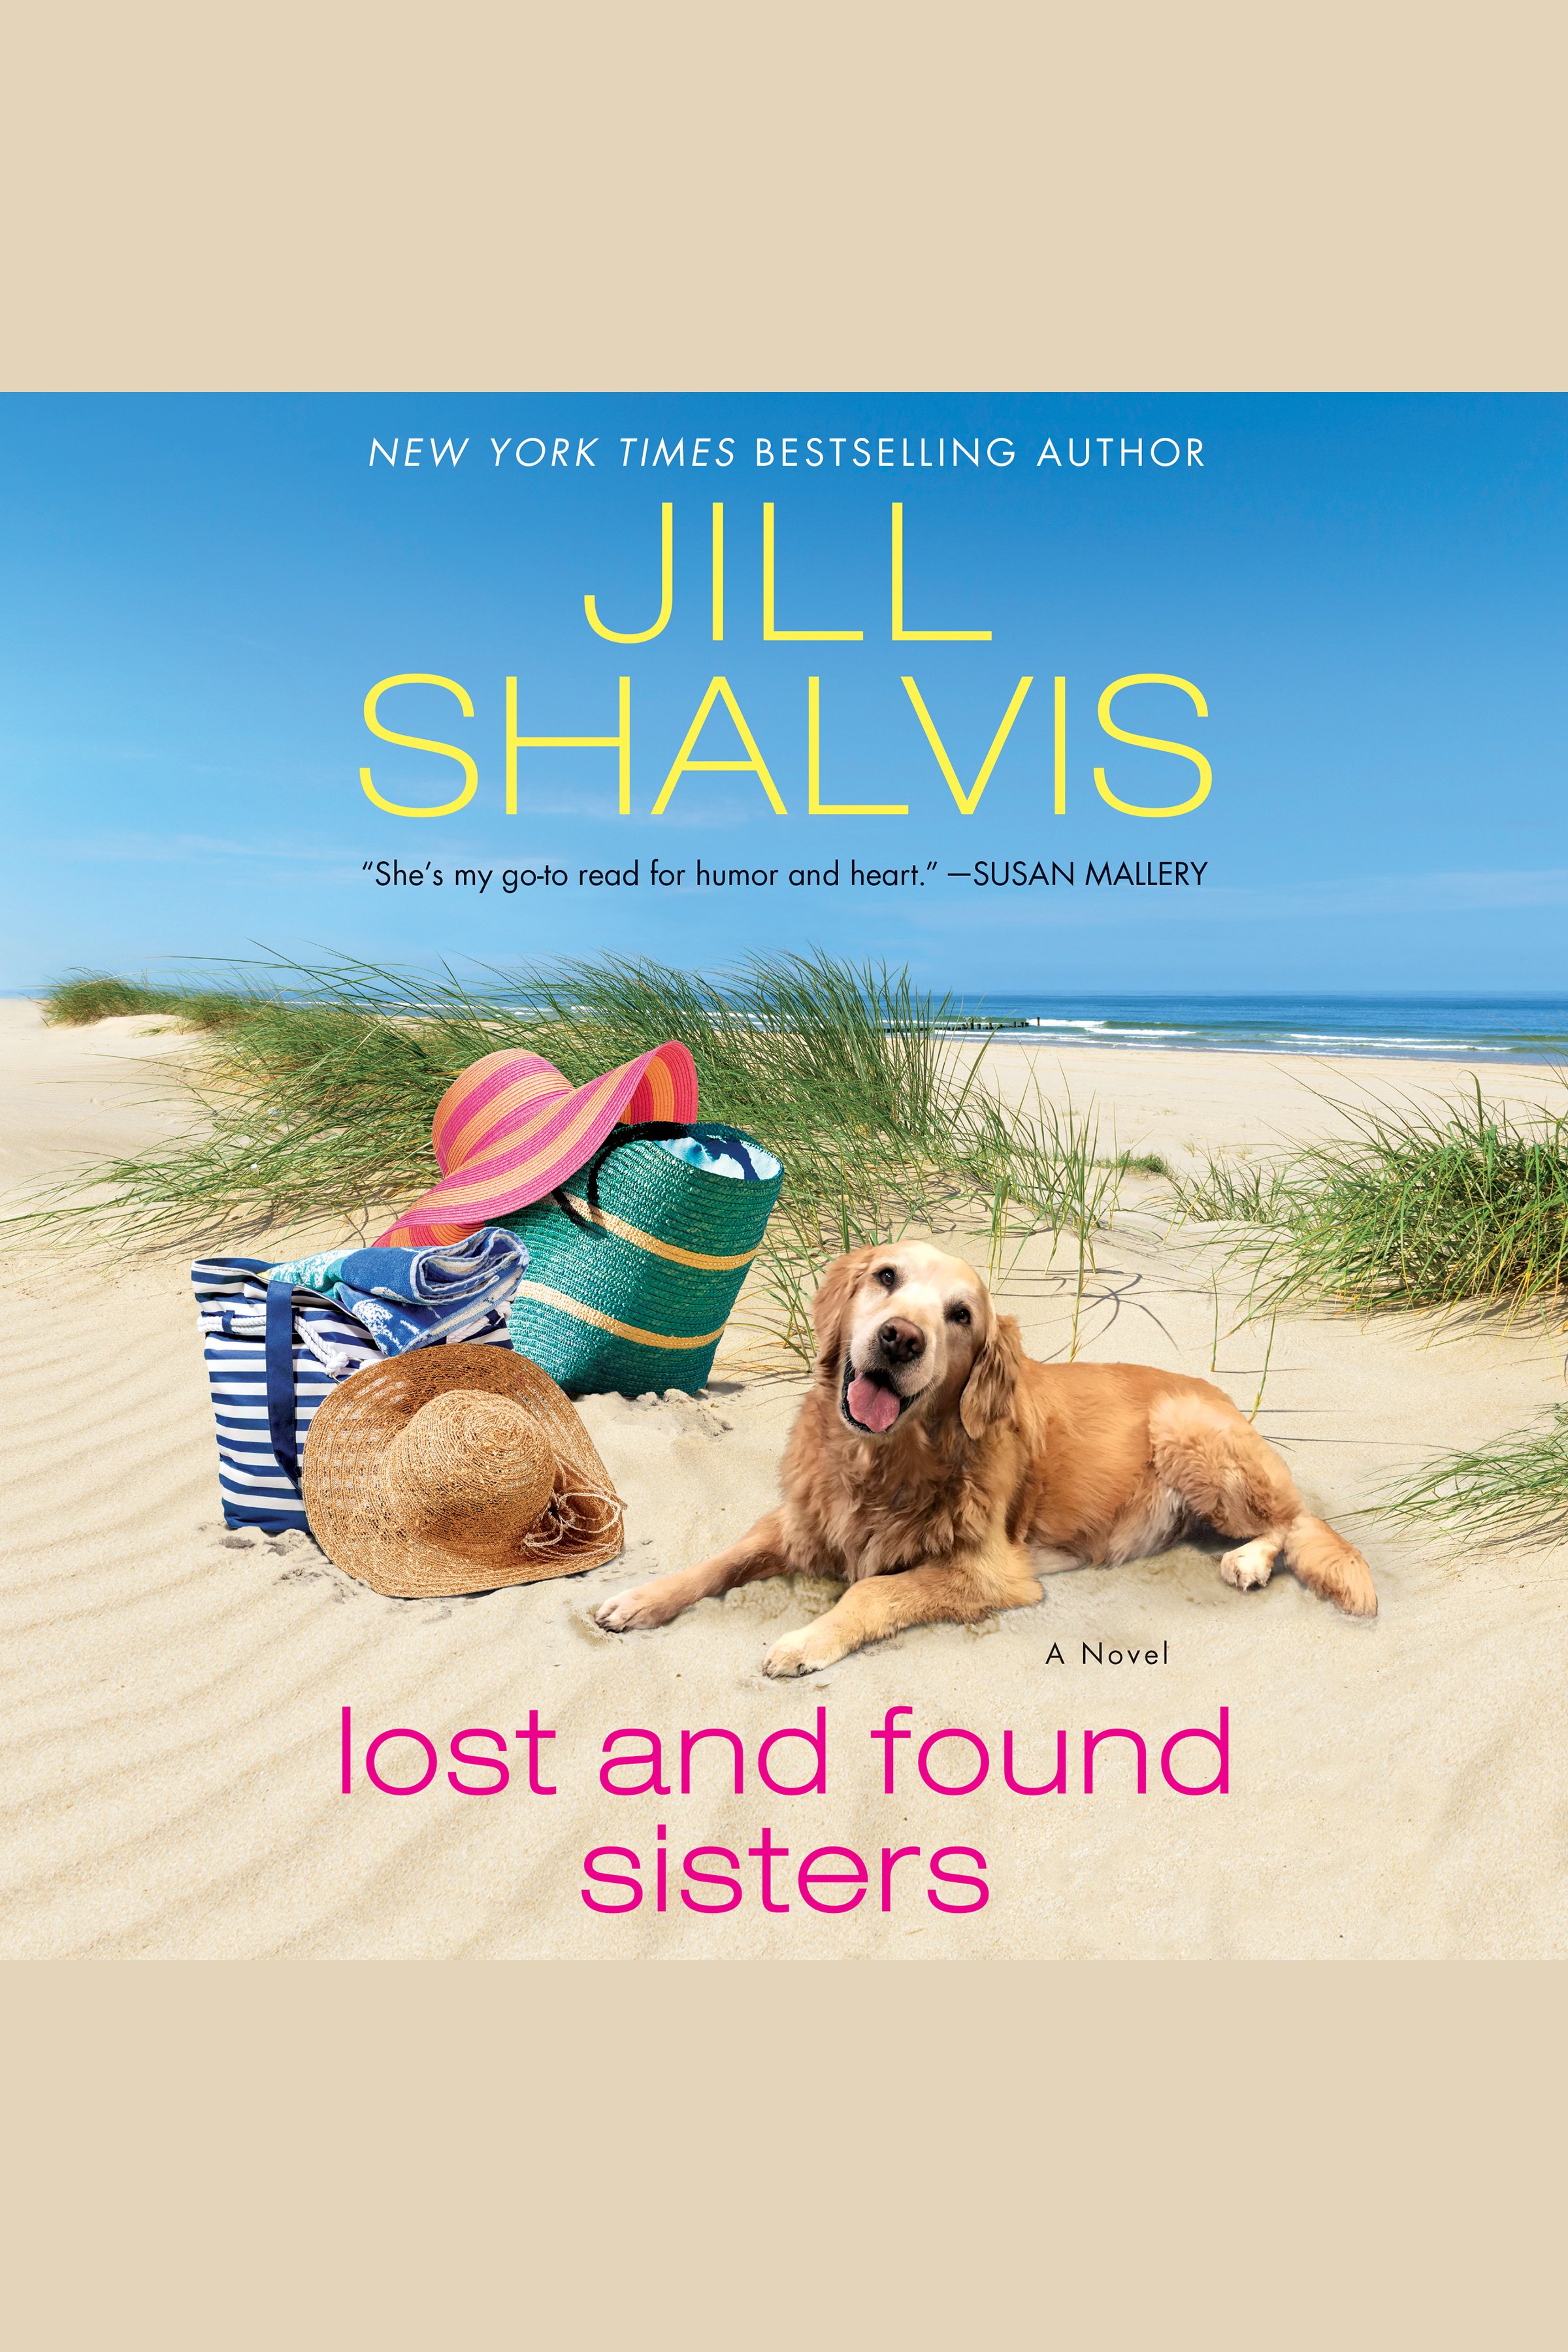 Lost and found sisters cover image